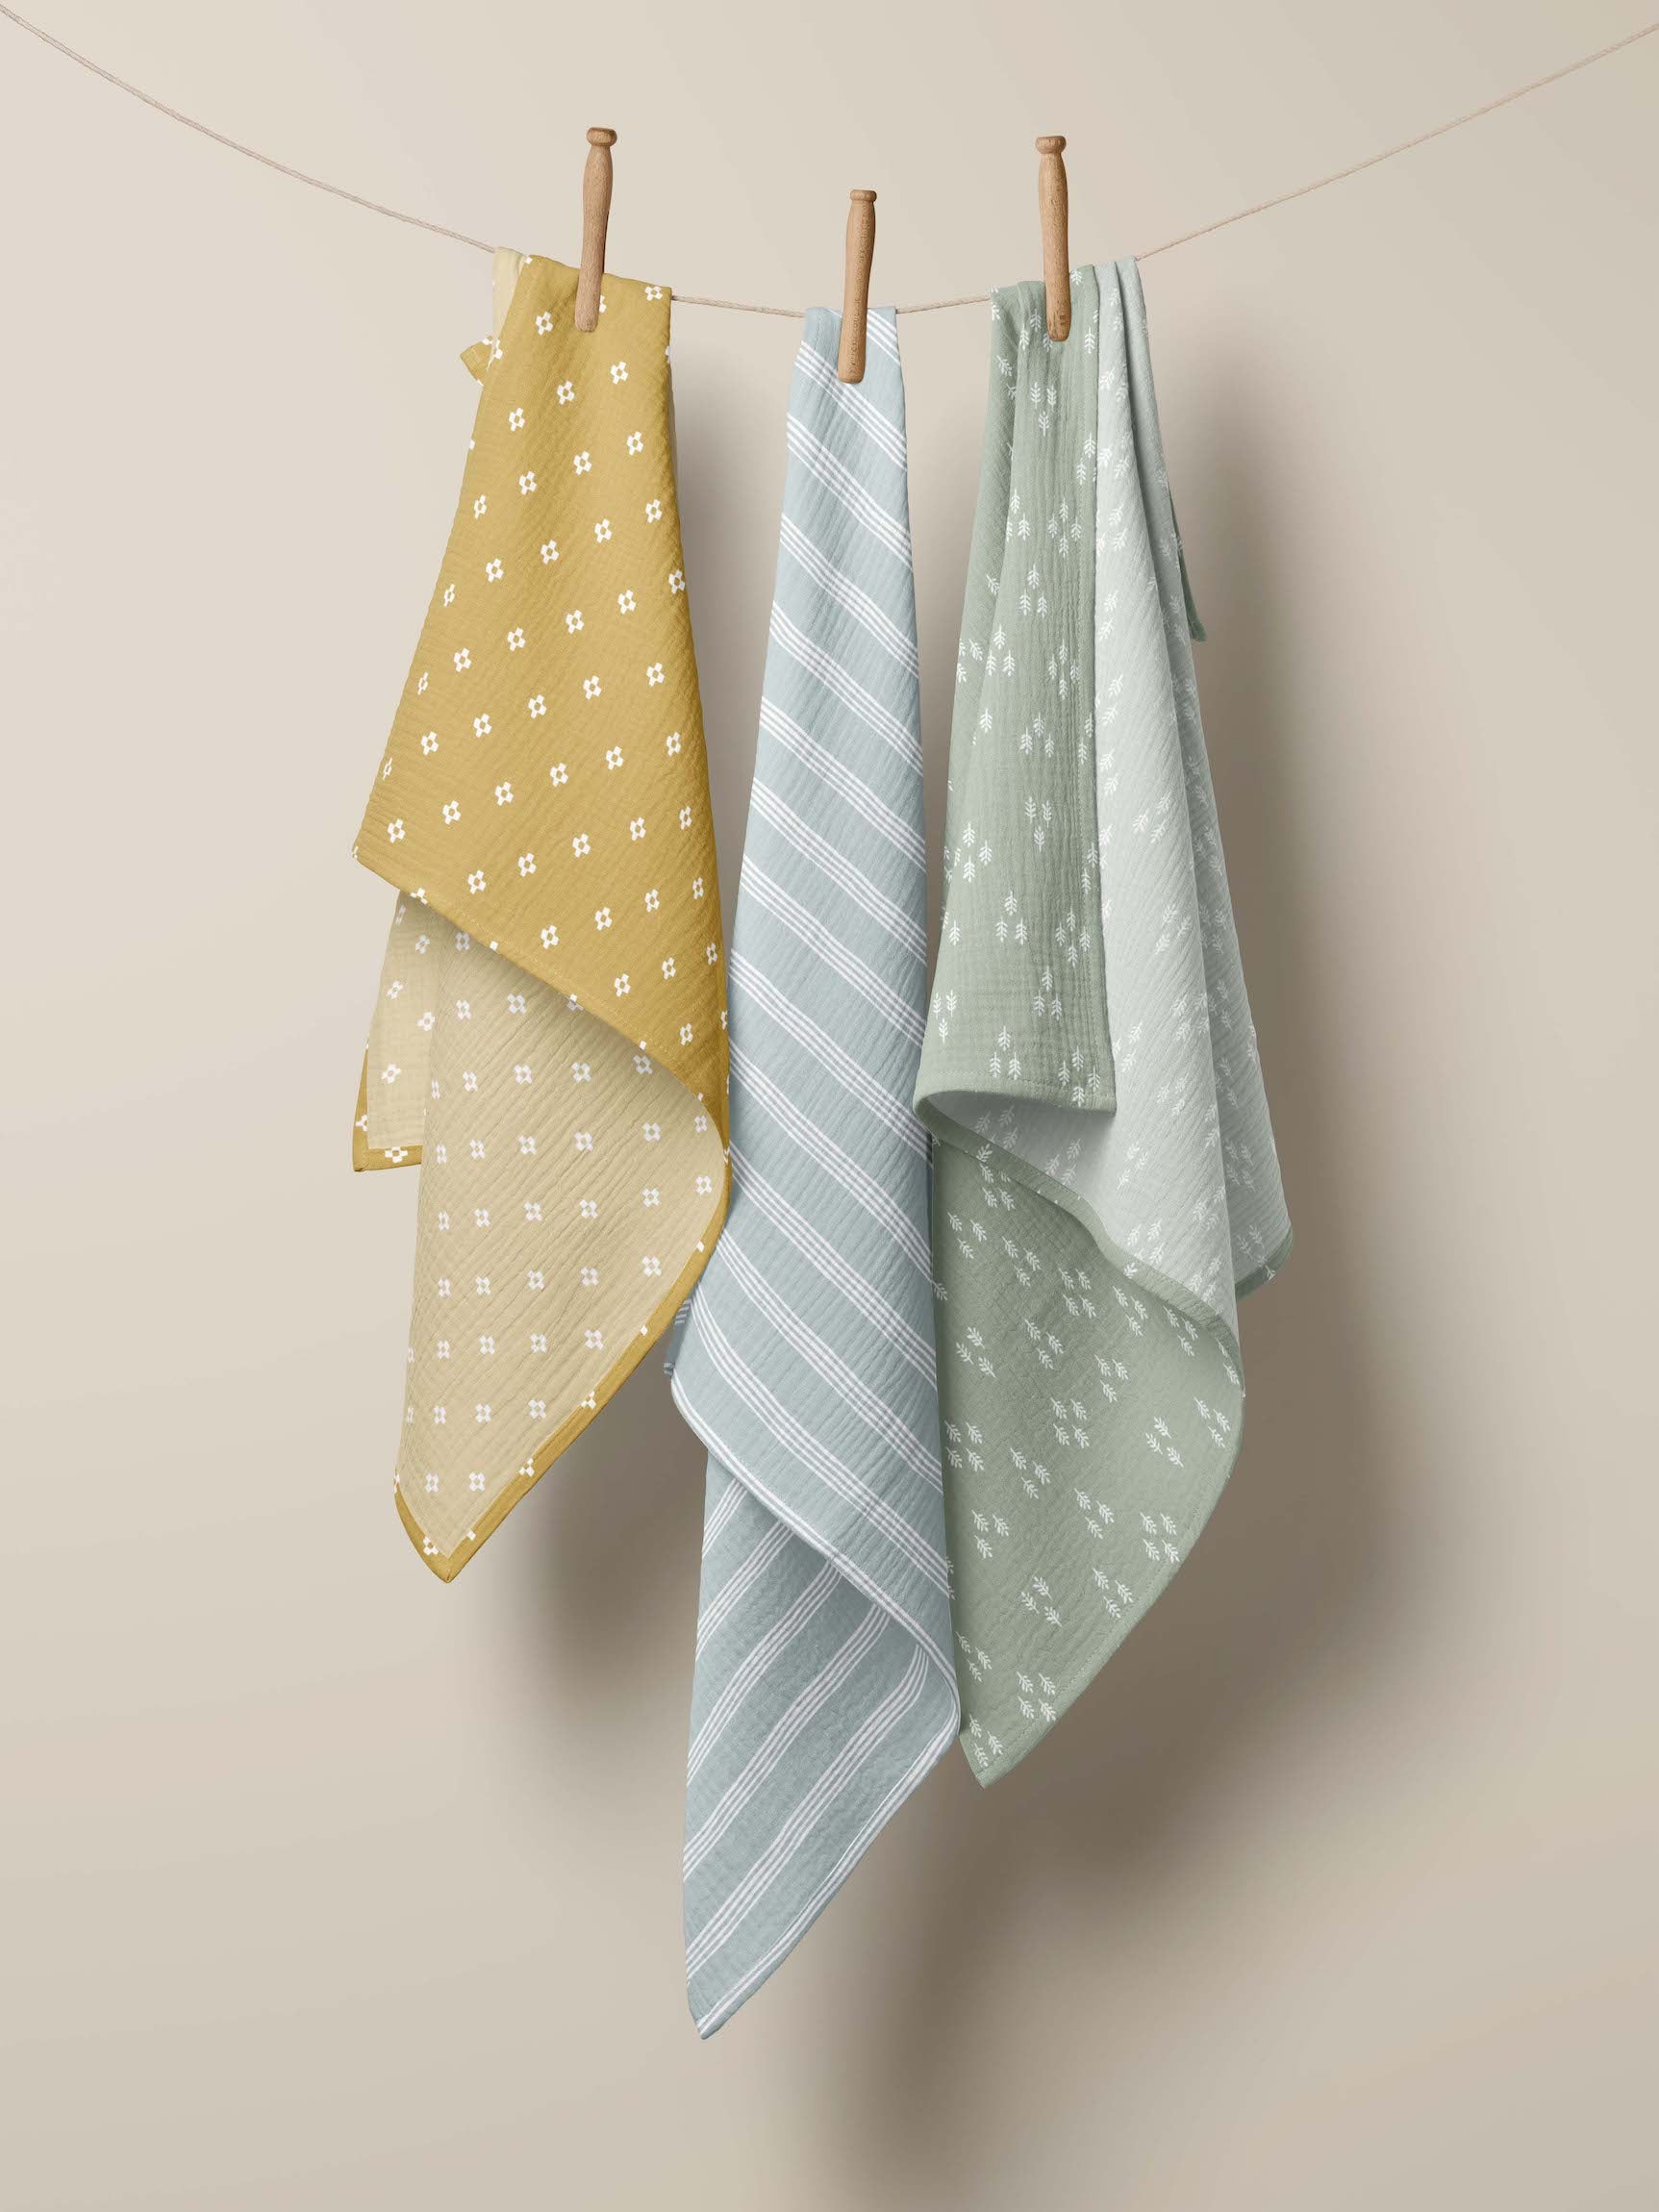 Three swaddles comprising the baby gift set for boy hanging in clothesline with clothespin 